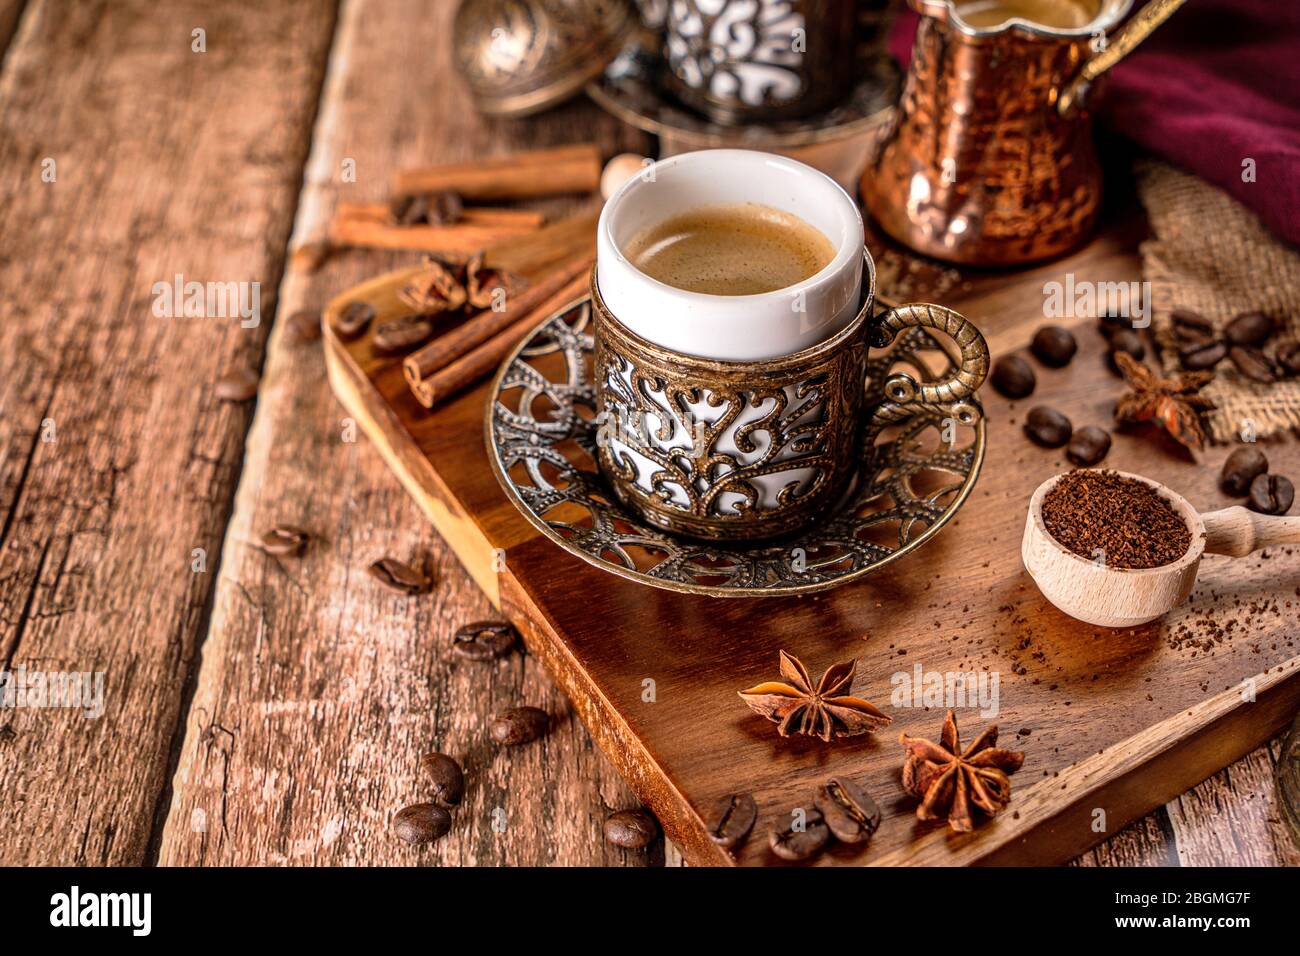 Traditional turkish coffee cup and roasted coffee beans Stock Photo